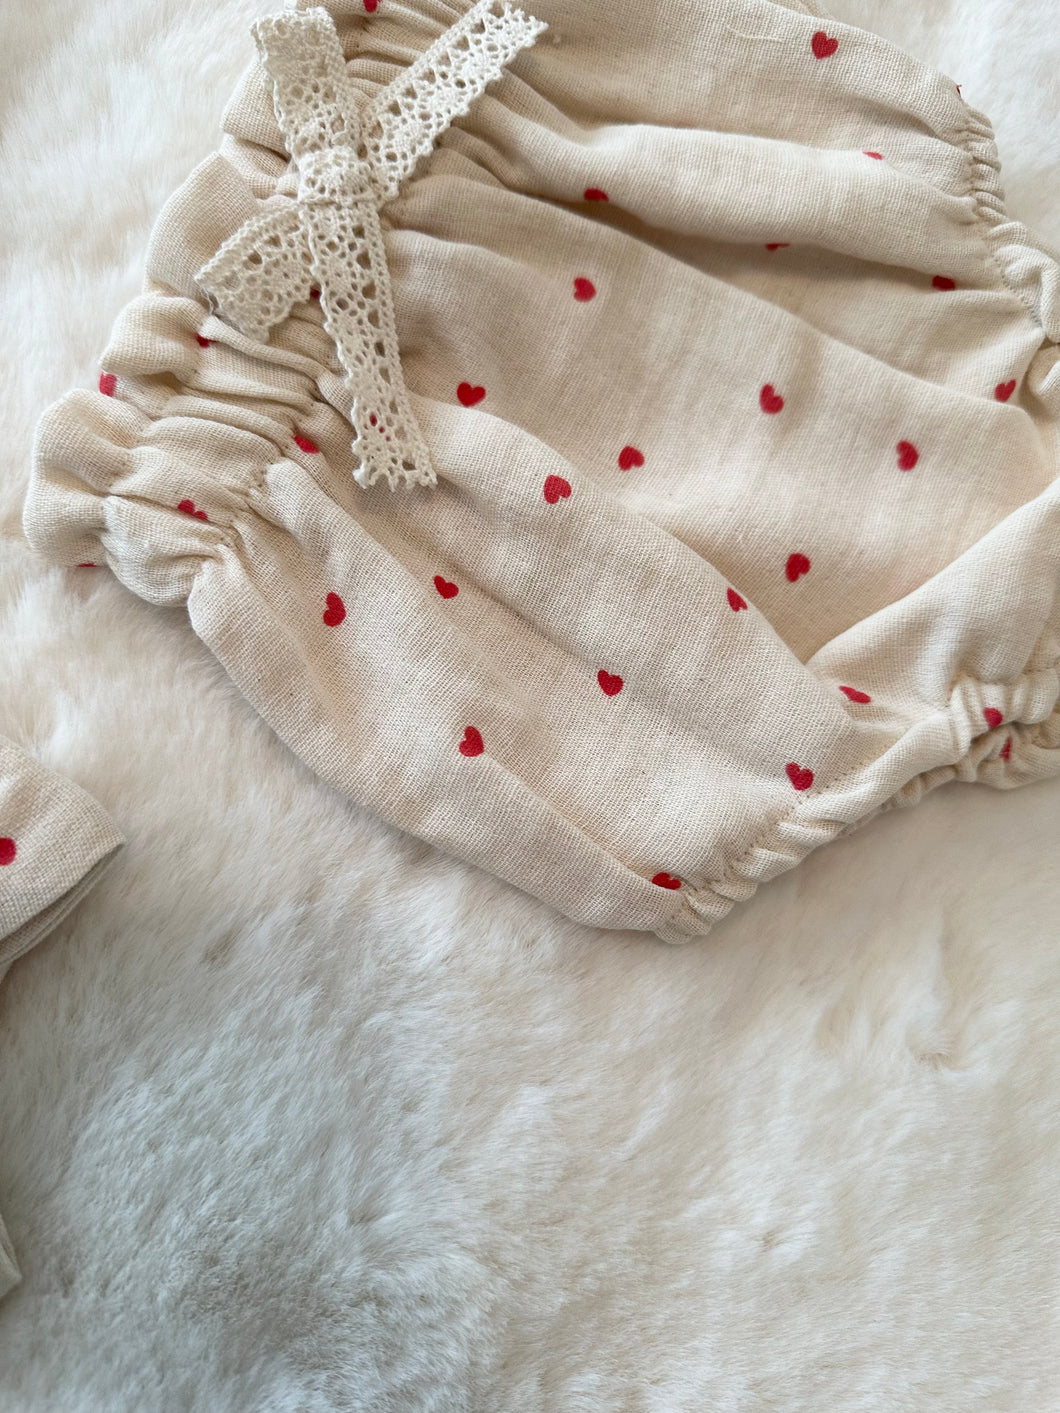 Linen bloomers with red hearts